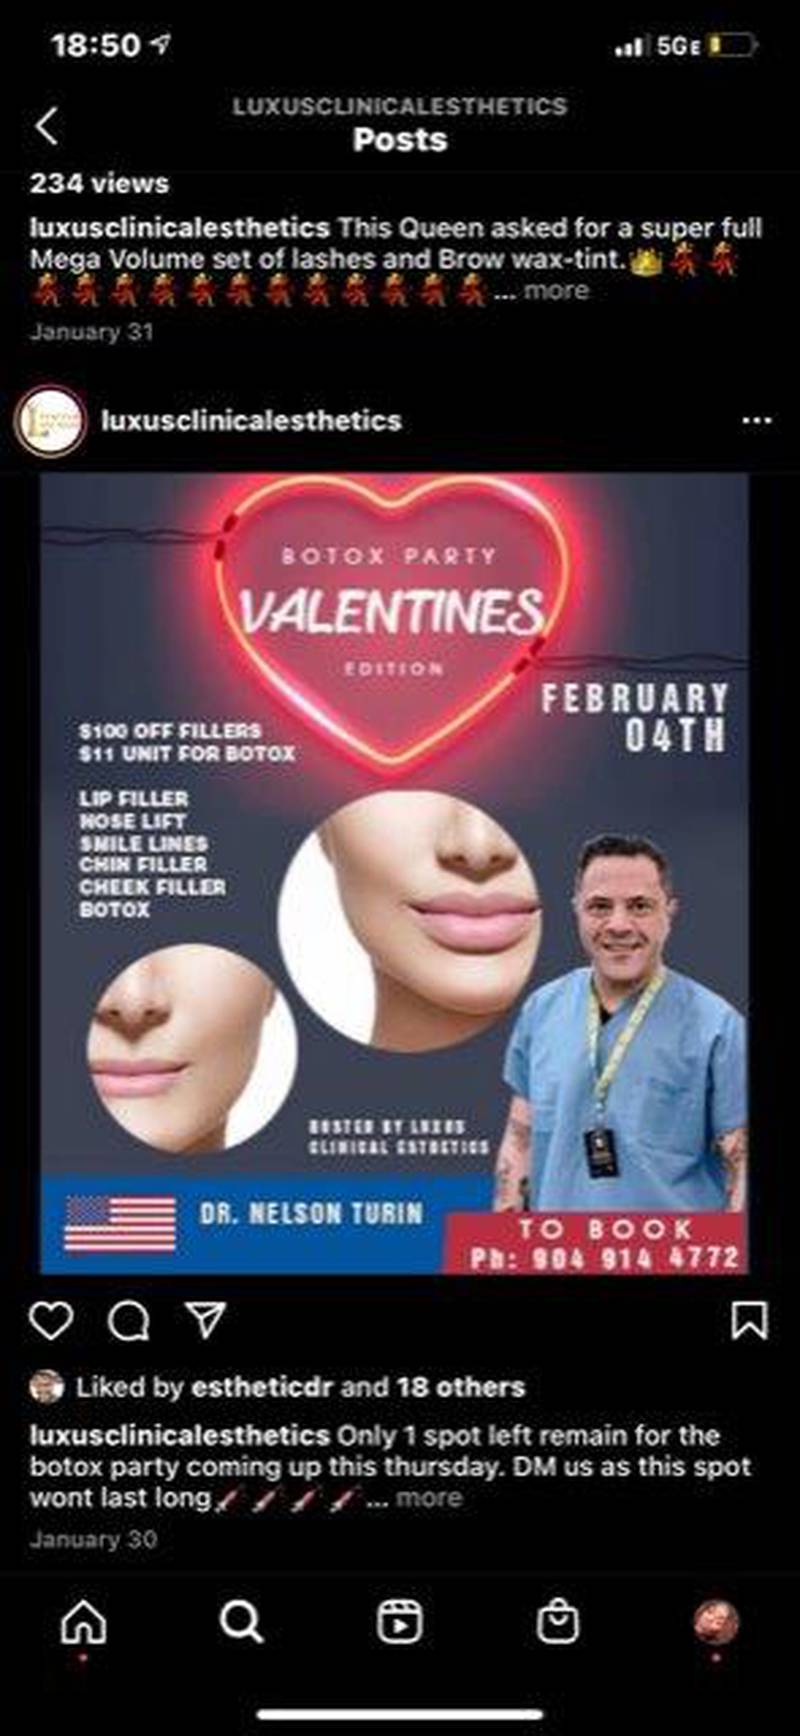 Online ads showed Turin posing as “Dr. Nelson Turin,” working out of a spa on San Jose Boulevard. One ad promoted an event called “Botox and Bubbles.” Police also found online videos that showed Turin injecting people.